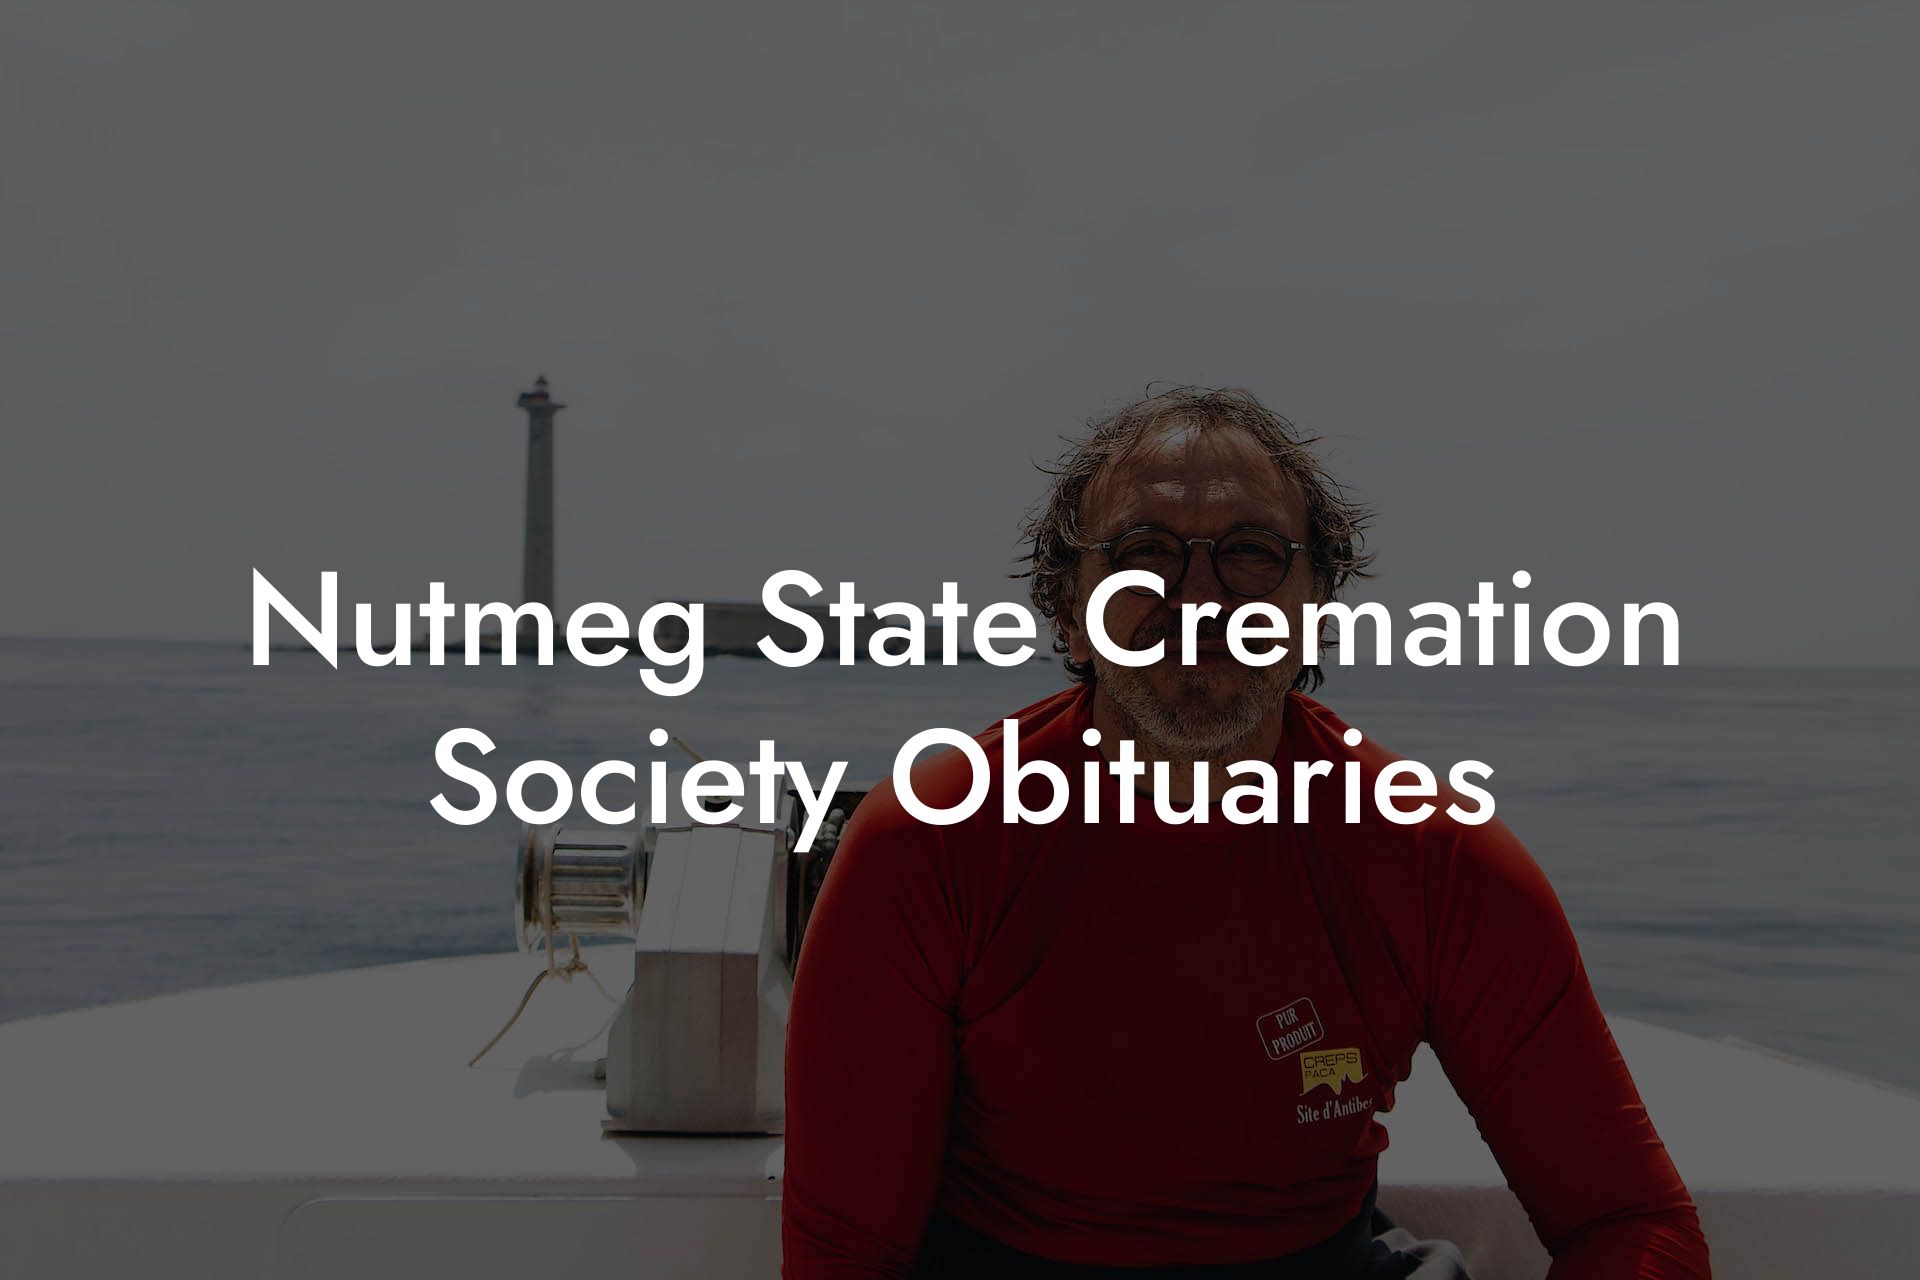 Nutmeg State Cremation Society Obituaries